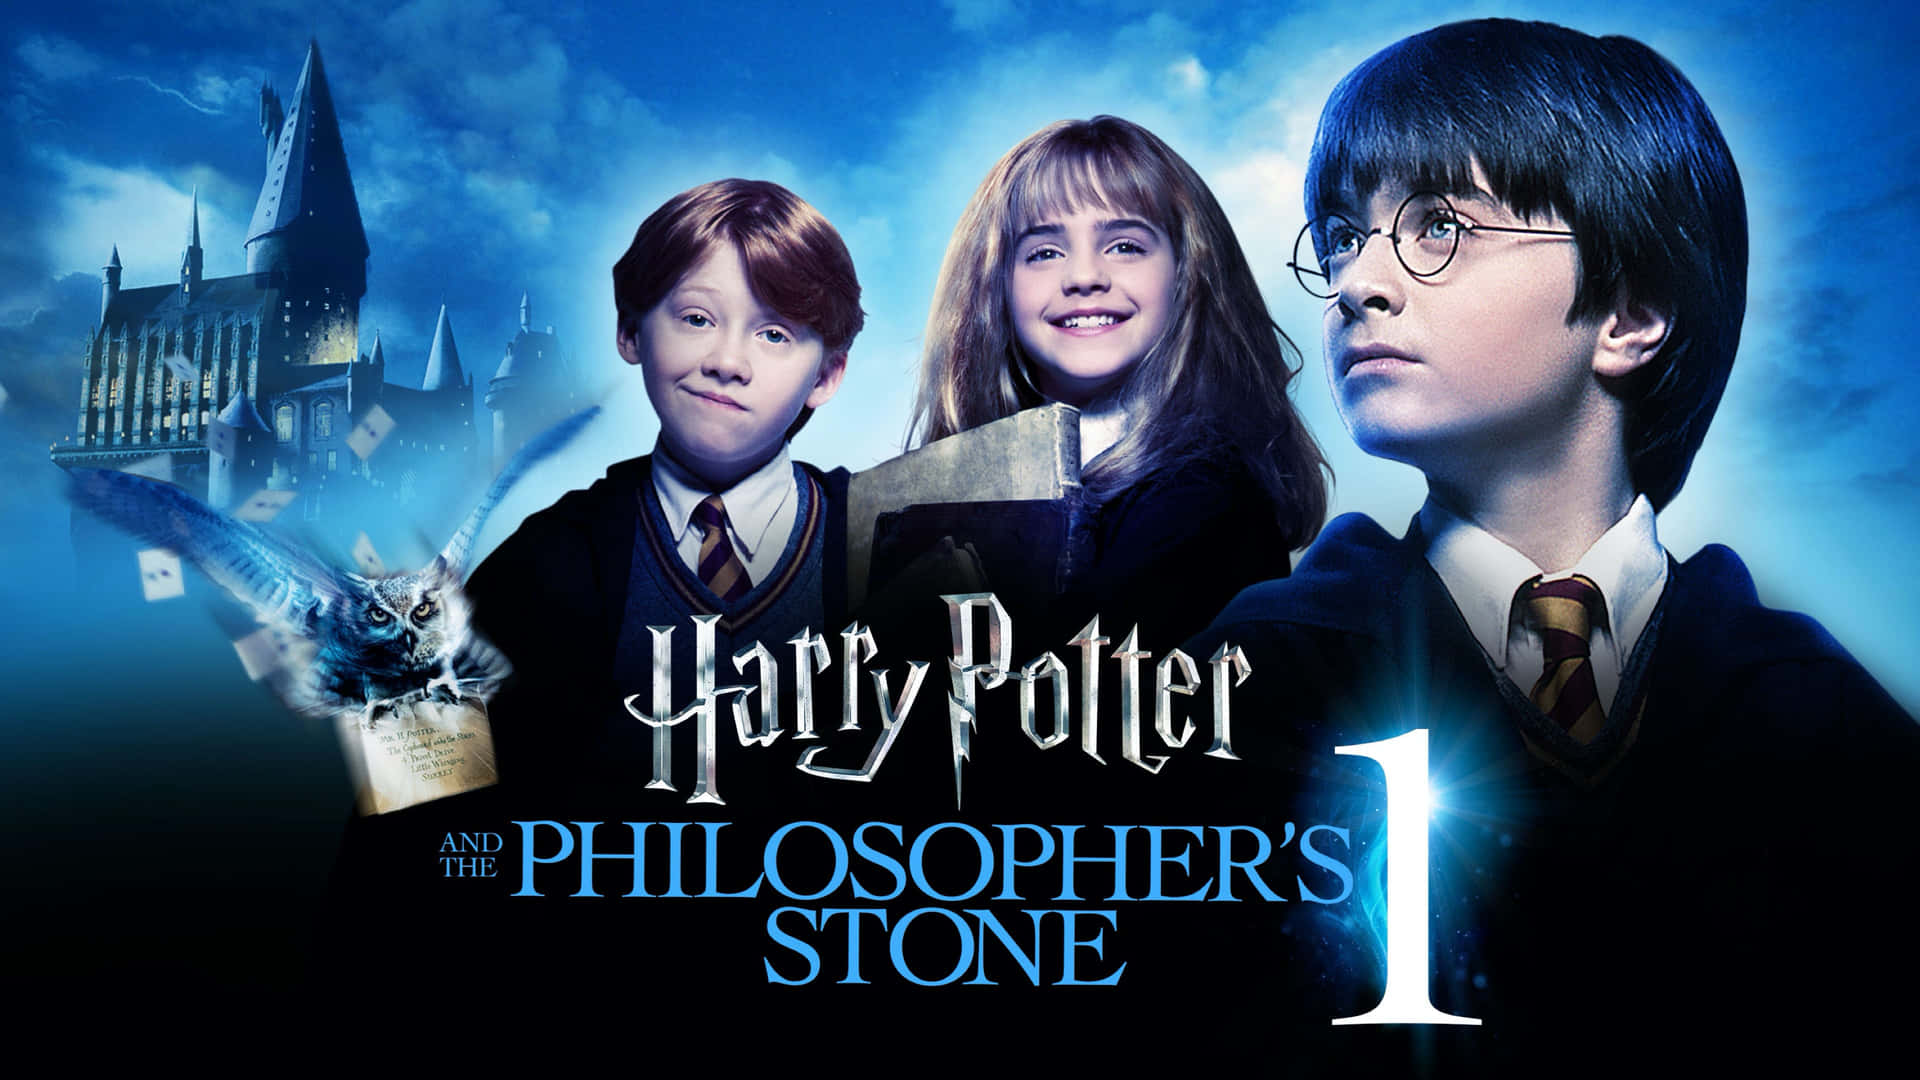 Unpriviledged children miraculously discovering the Philosopher's Stone Wallpaper